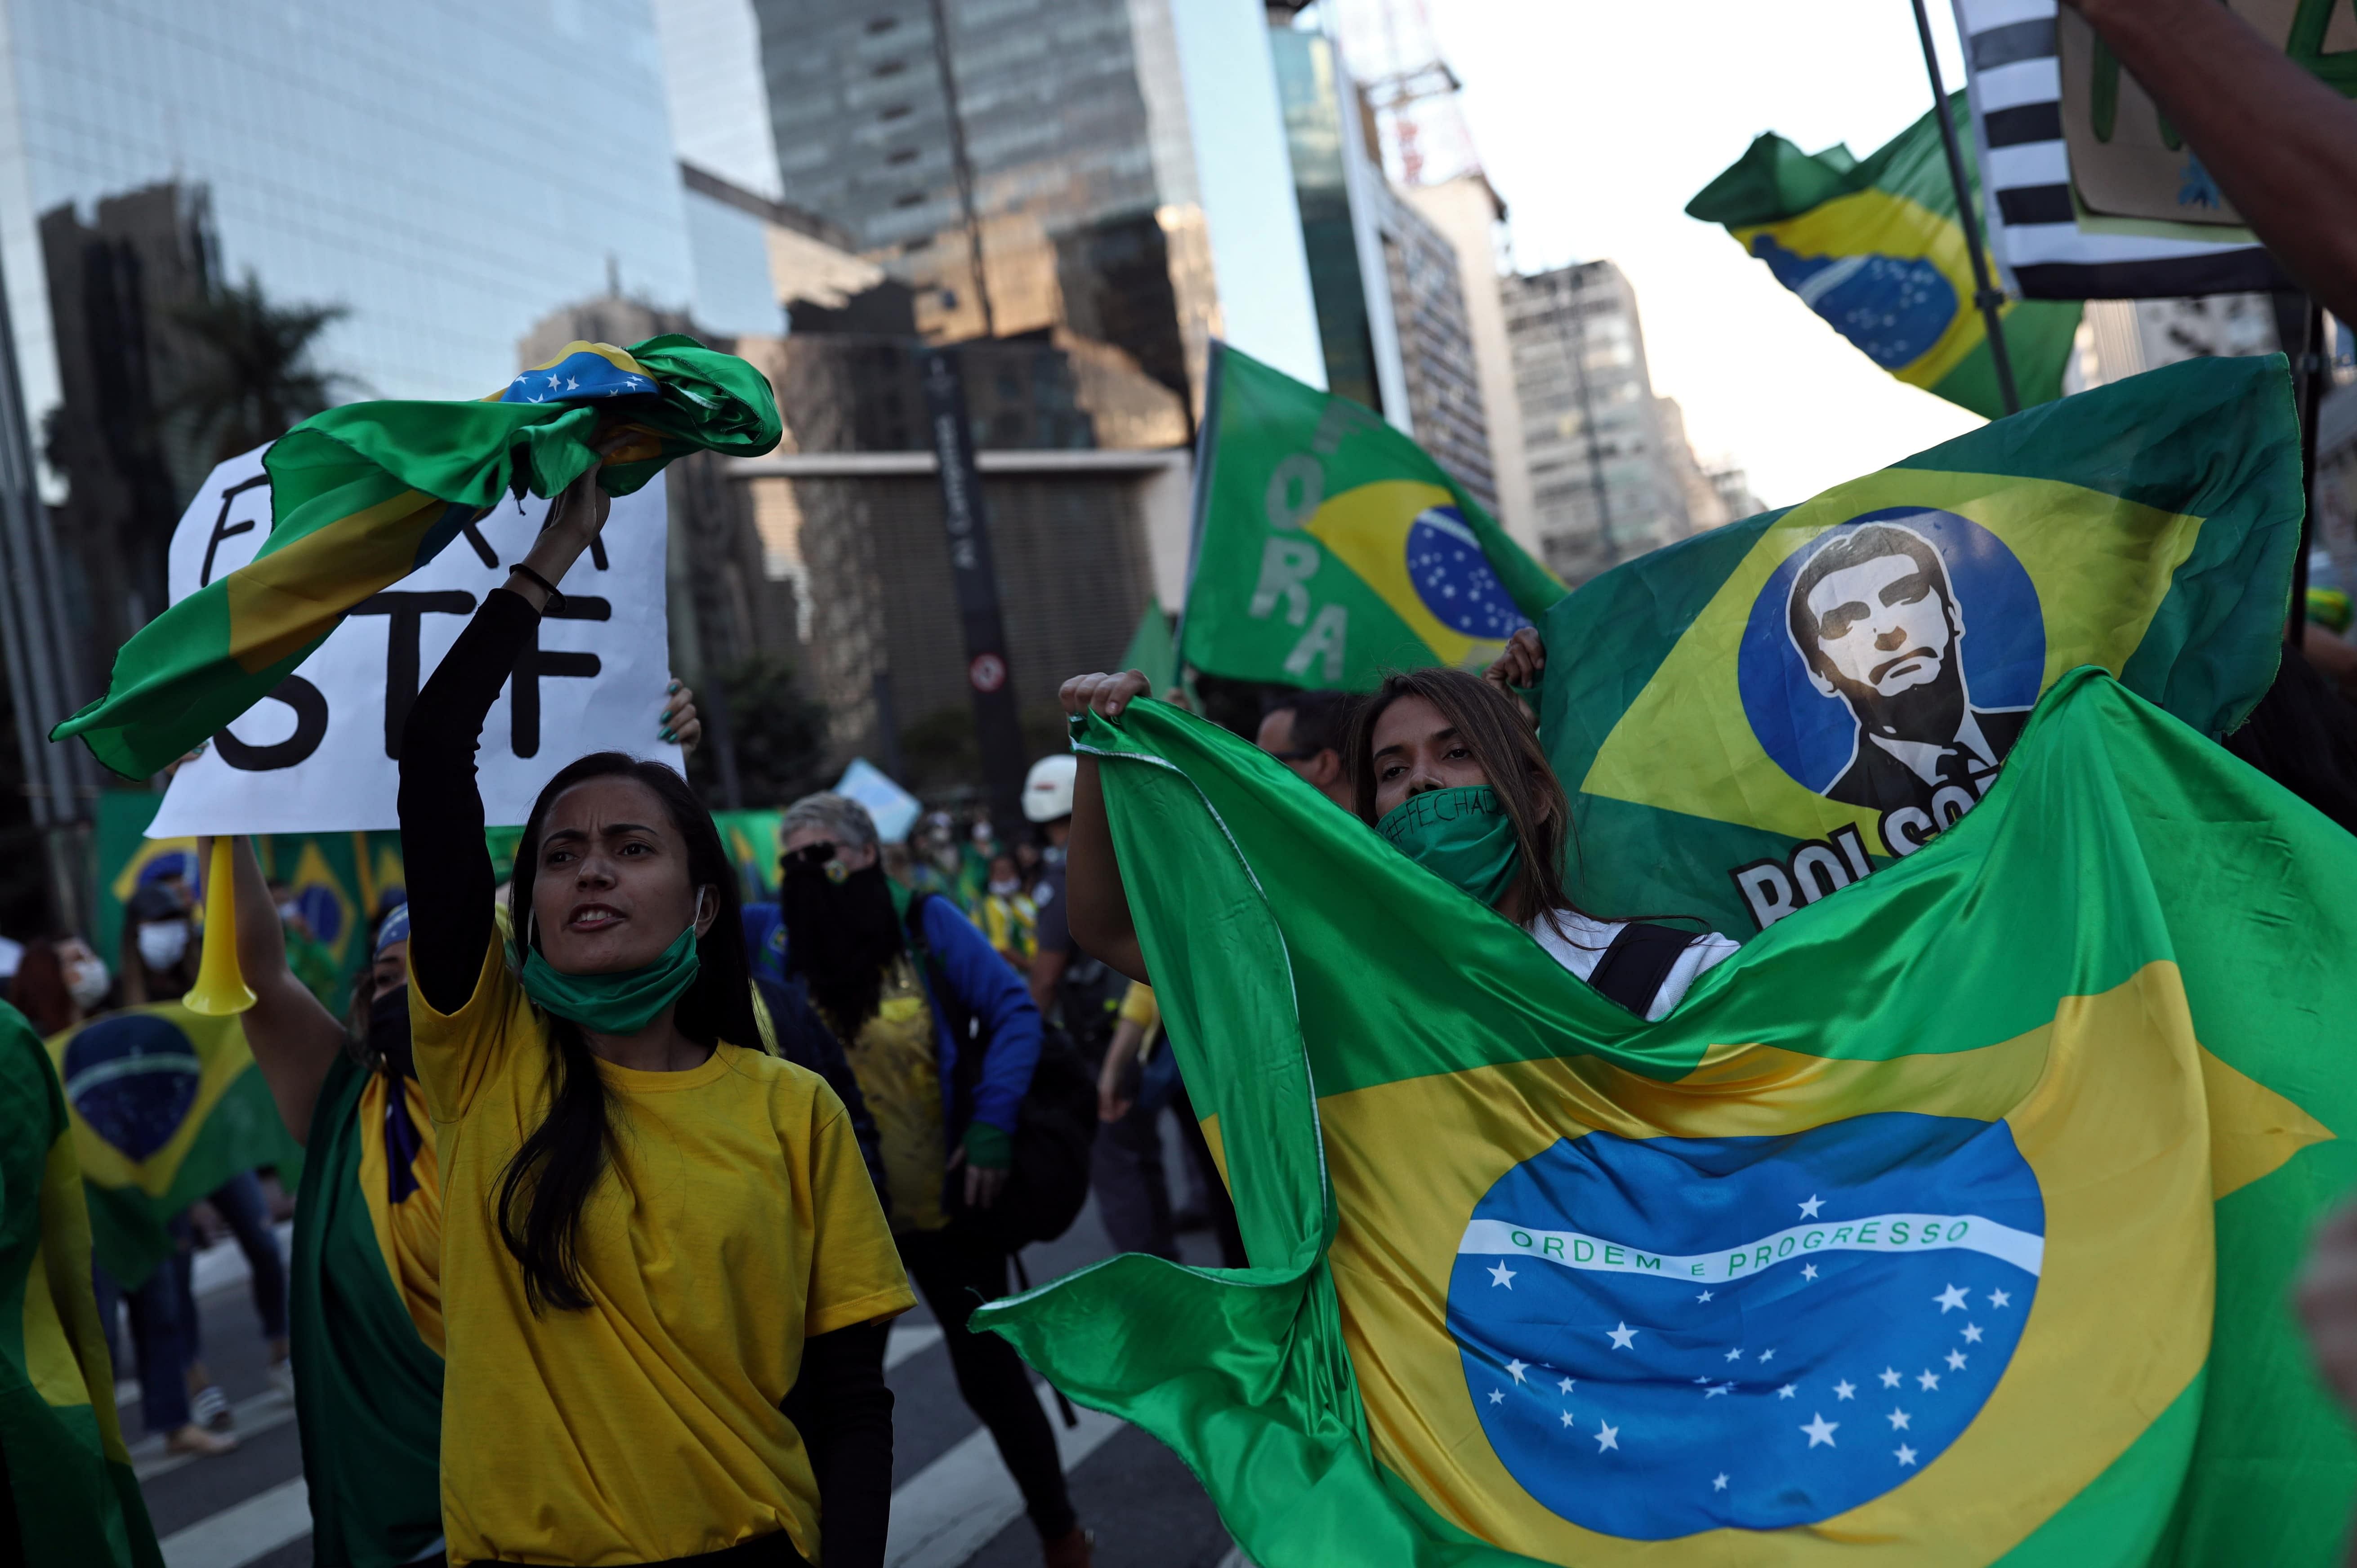 Brazil's Supreme Court blocked Bolsonaro's pick for a new chief on Wednesday, enraging the president. (Credit: Reuters Photo)